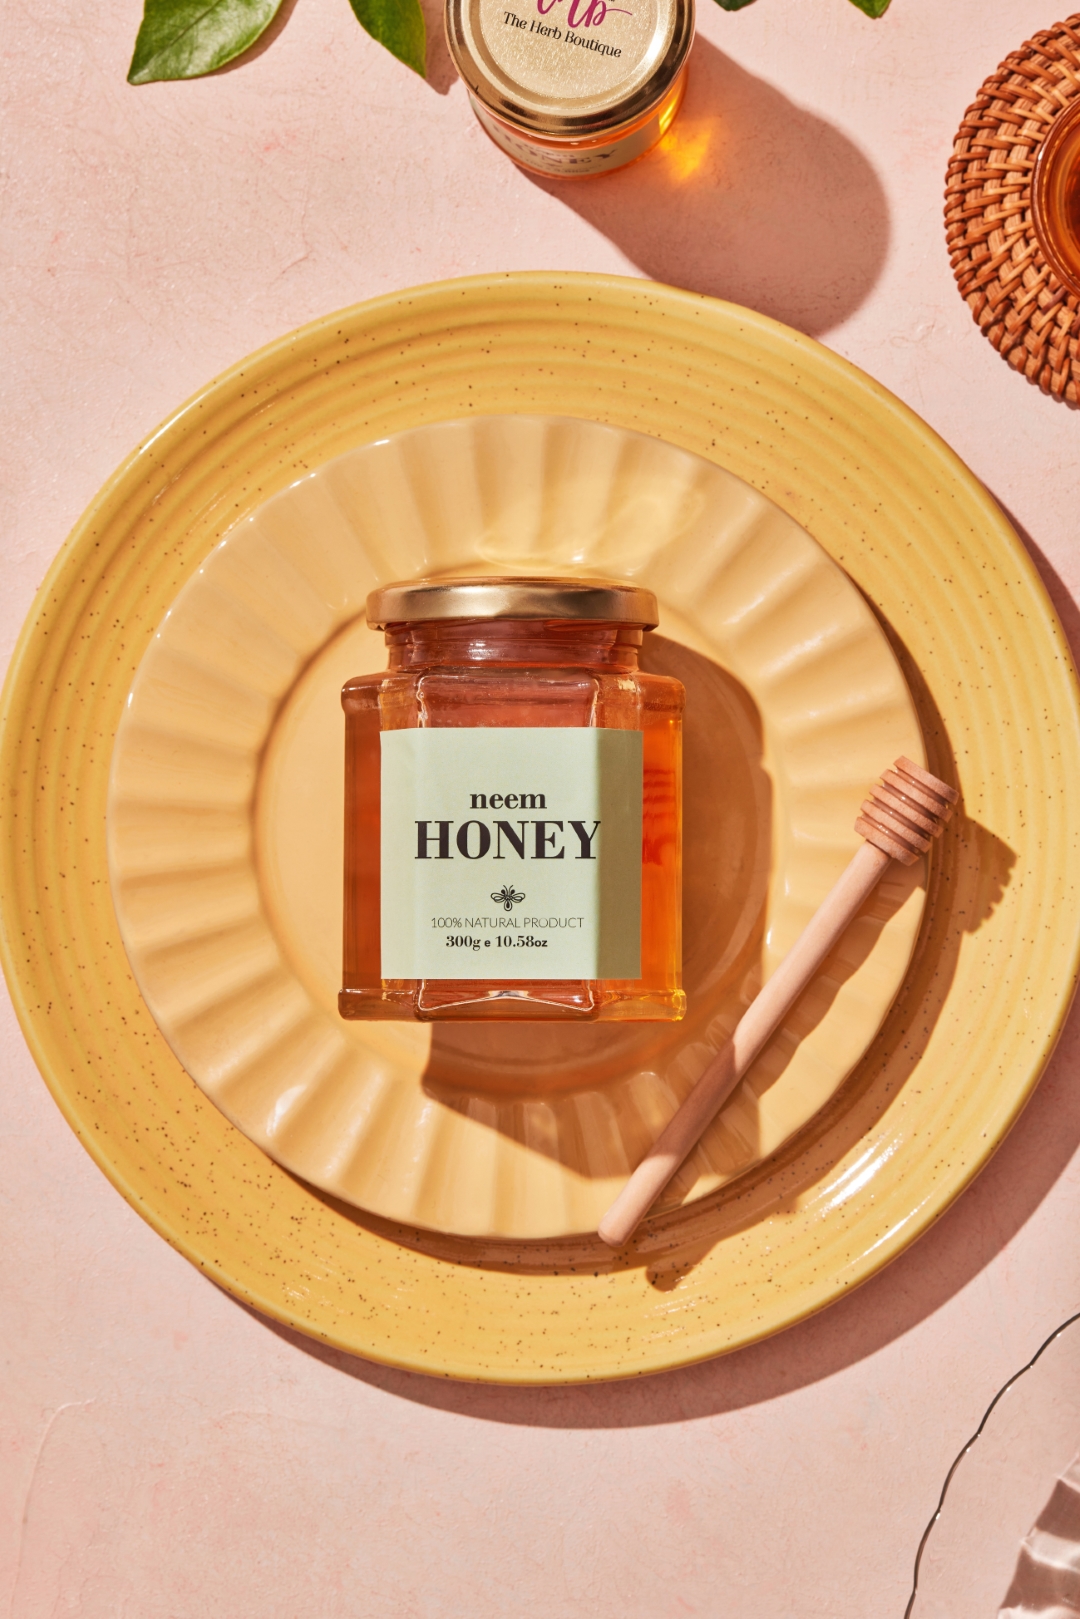 Product: The Herb Boutique Neem Honey